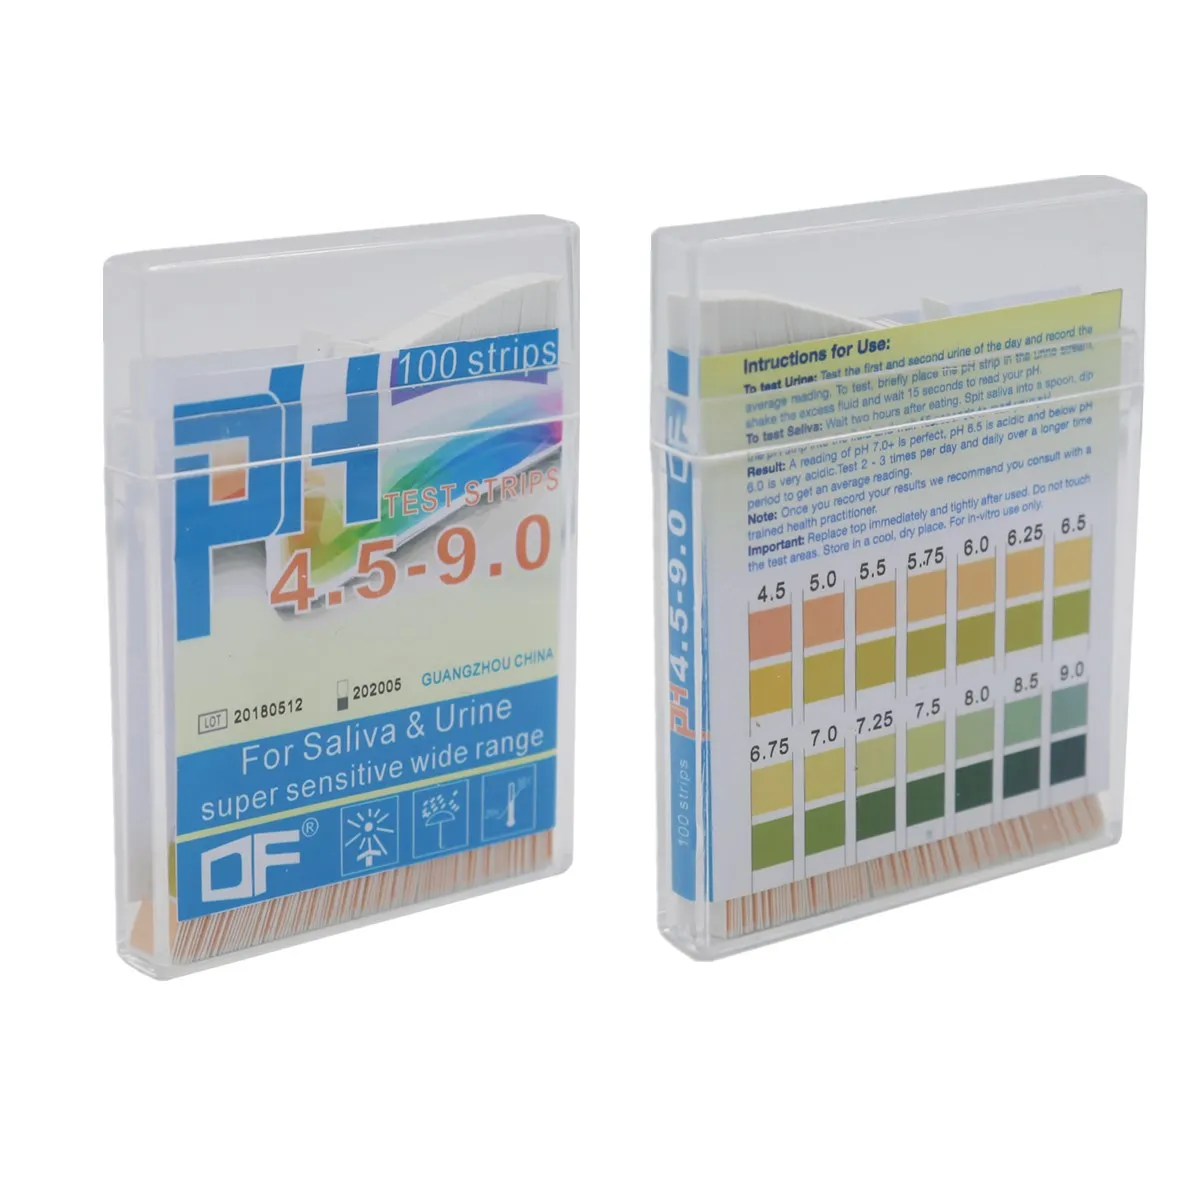 Instant Read pH Test Strips